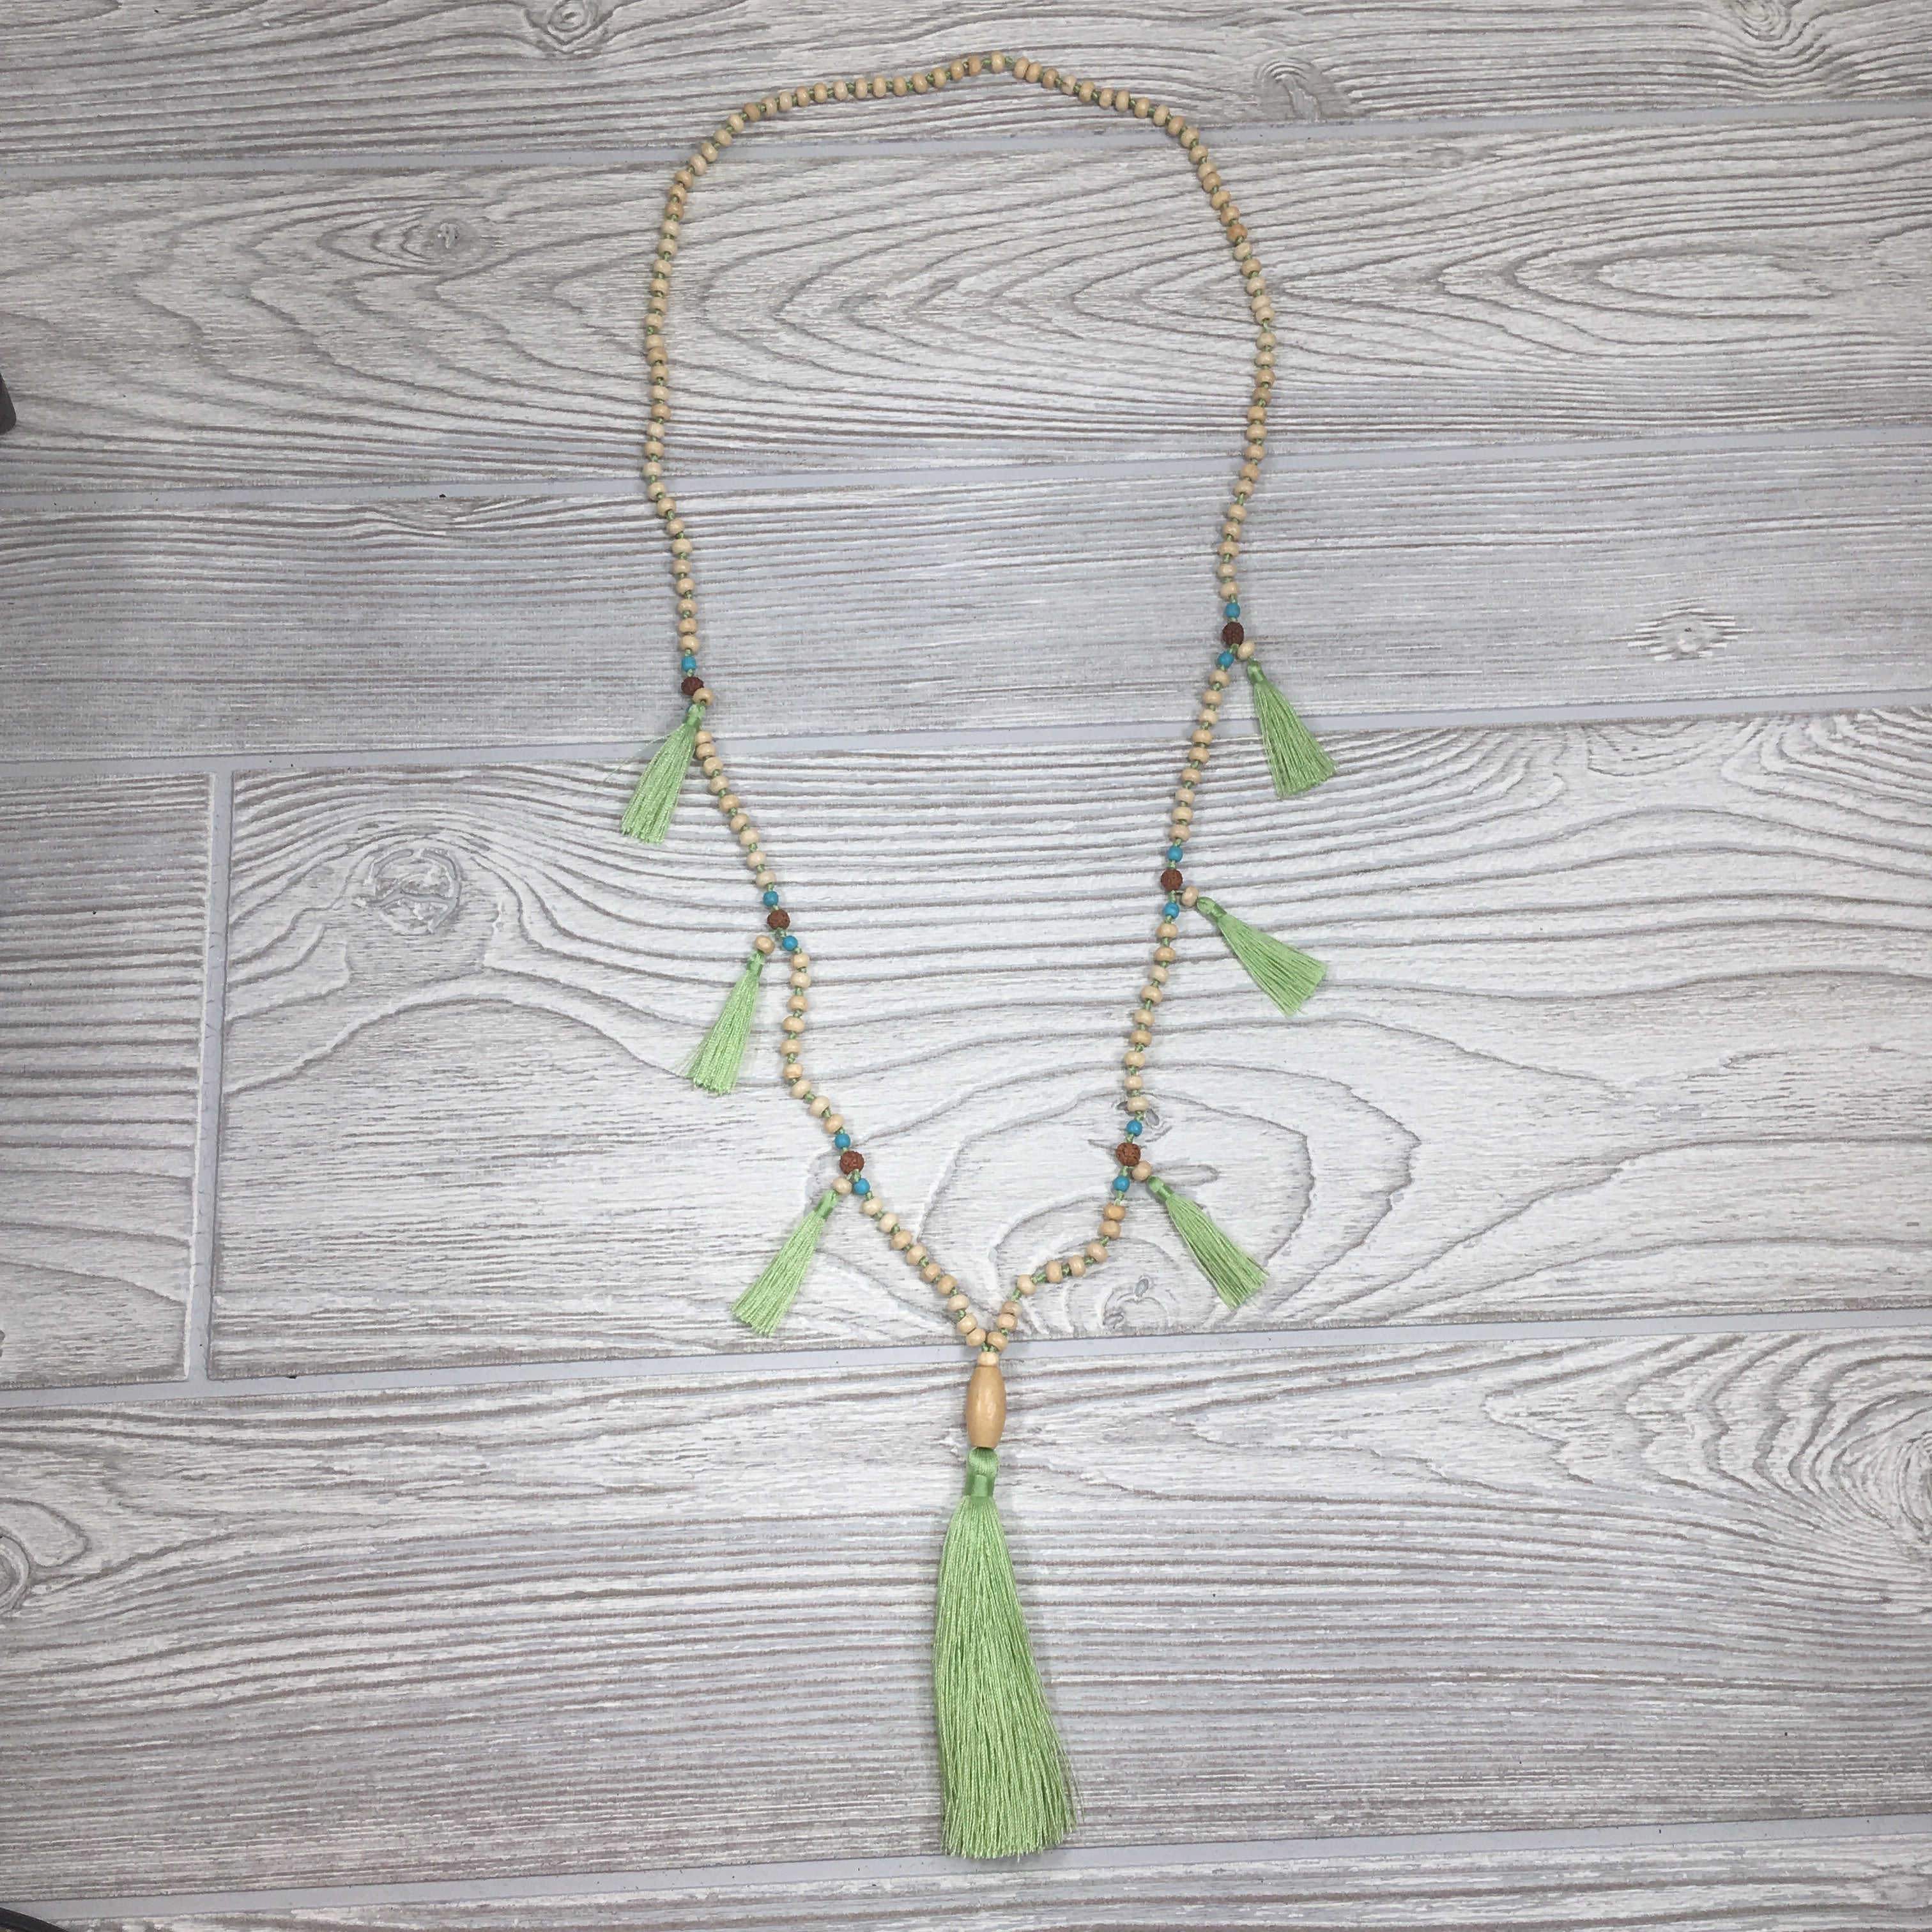 Knotted Wood Mala Necklace Mint Green Tassels